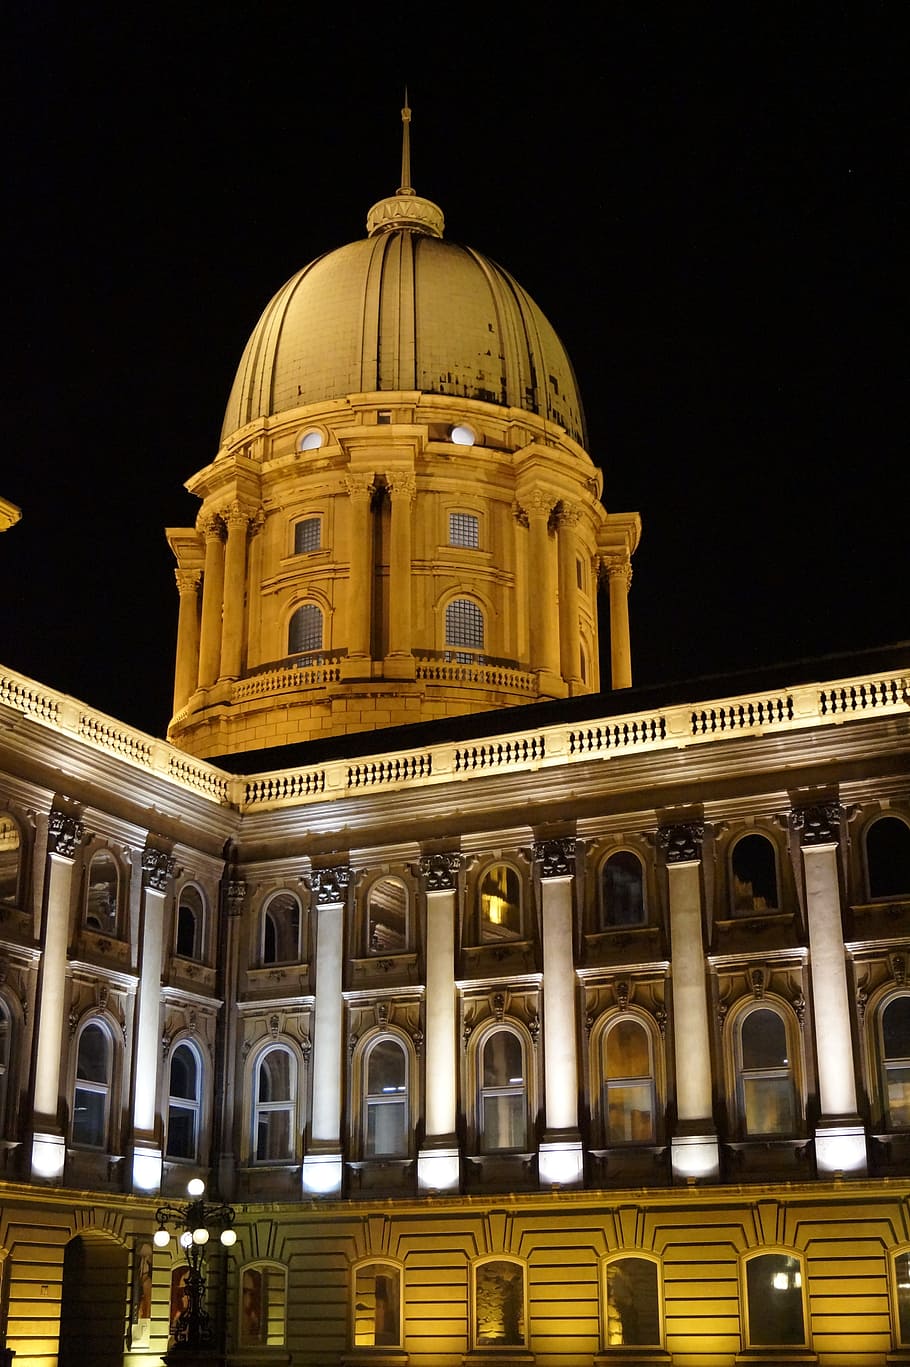 Budapest, Hungary, Buda Castle, Castle, Dome, dome, buildup, building, floodlight, at night, architecture